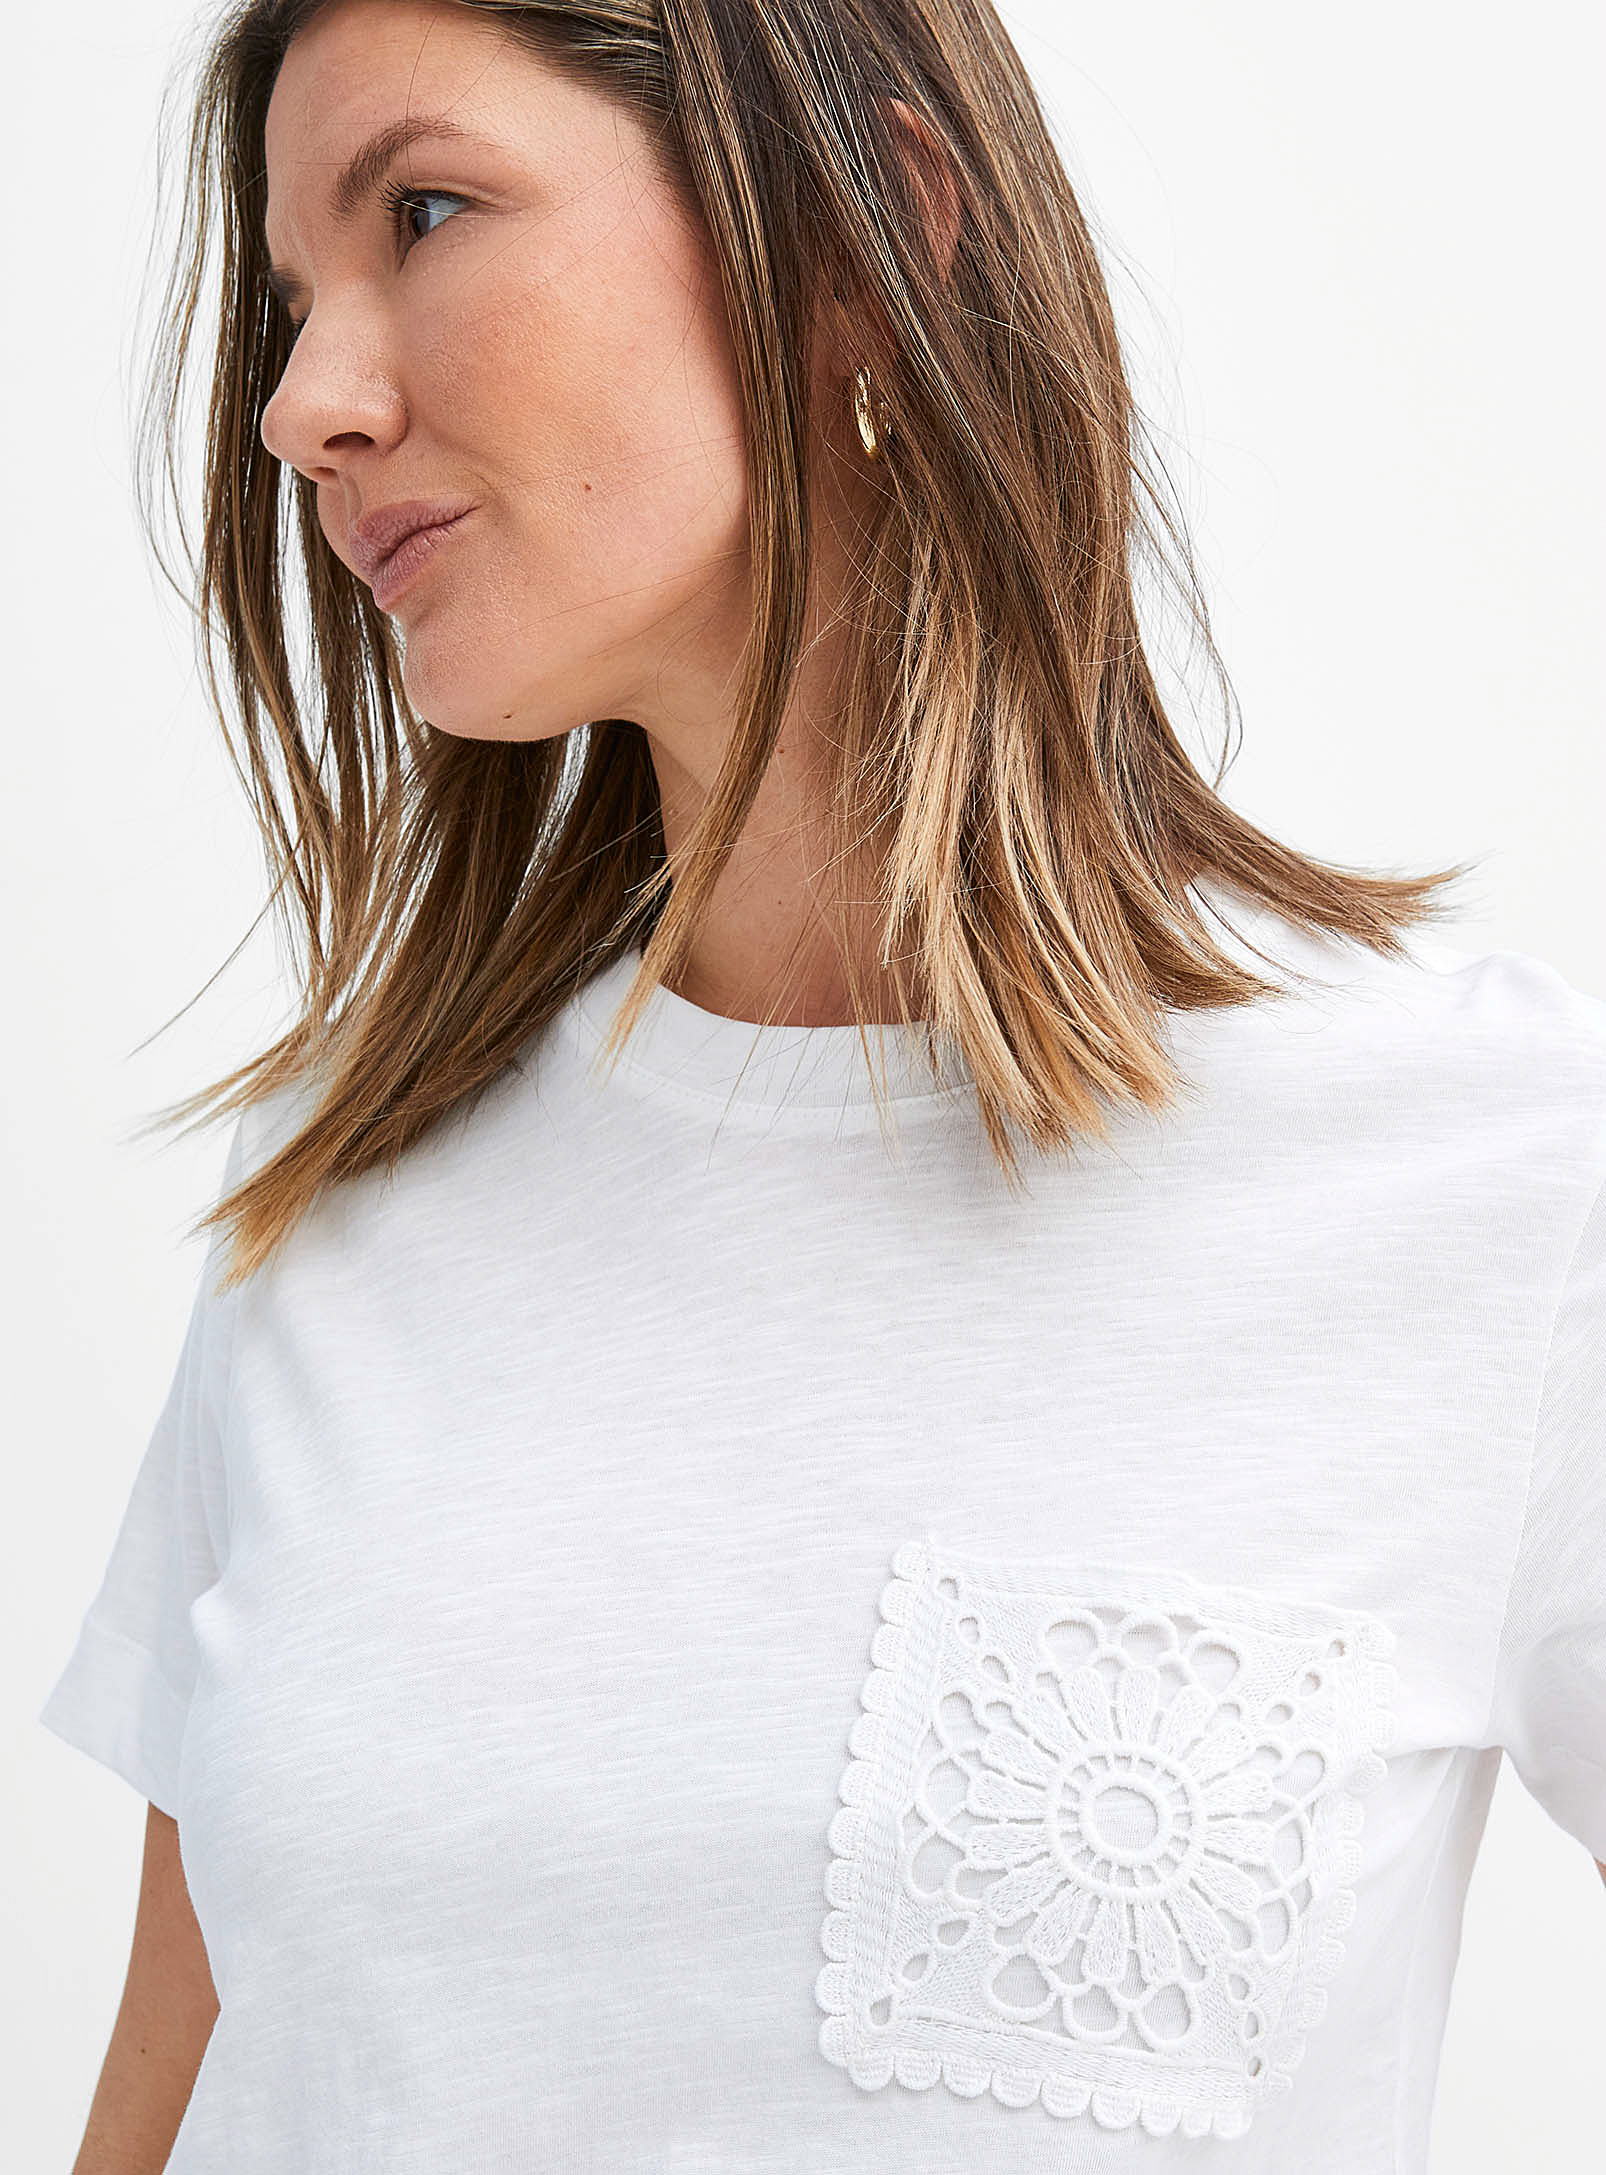 Contemporaine Crocheted Pocket T-shirt In Ivory White